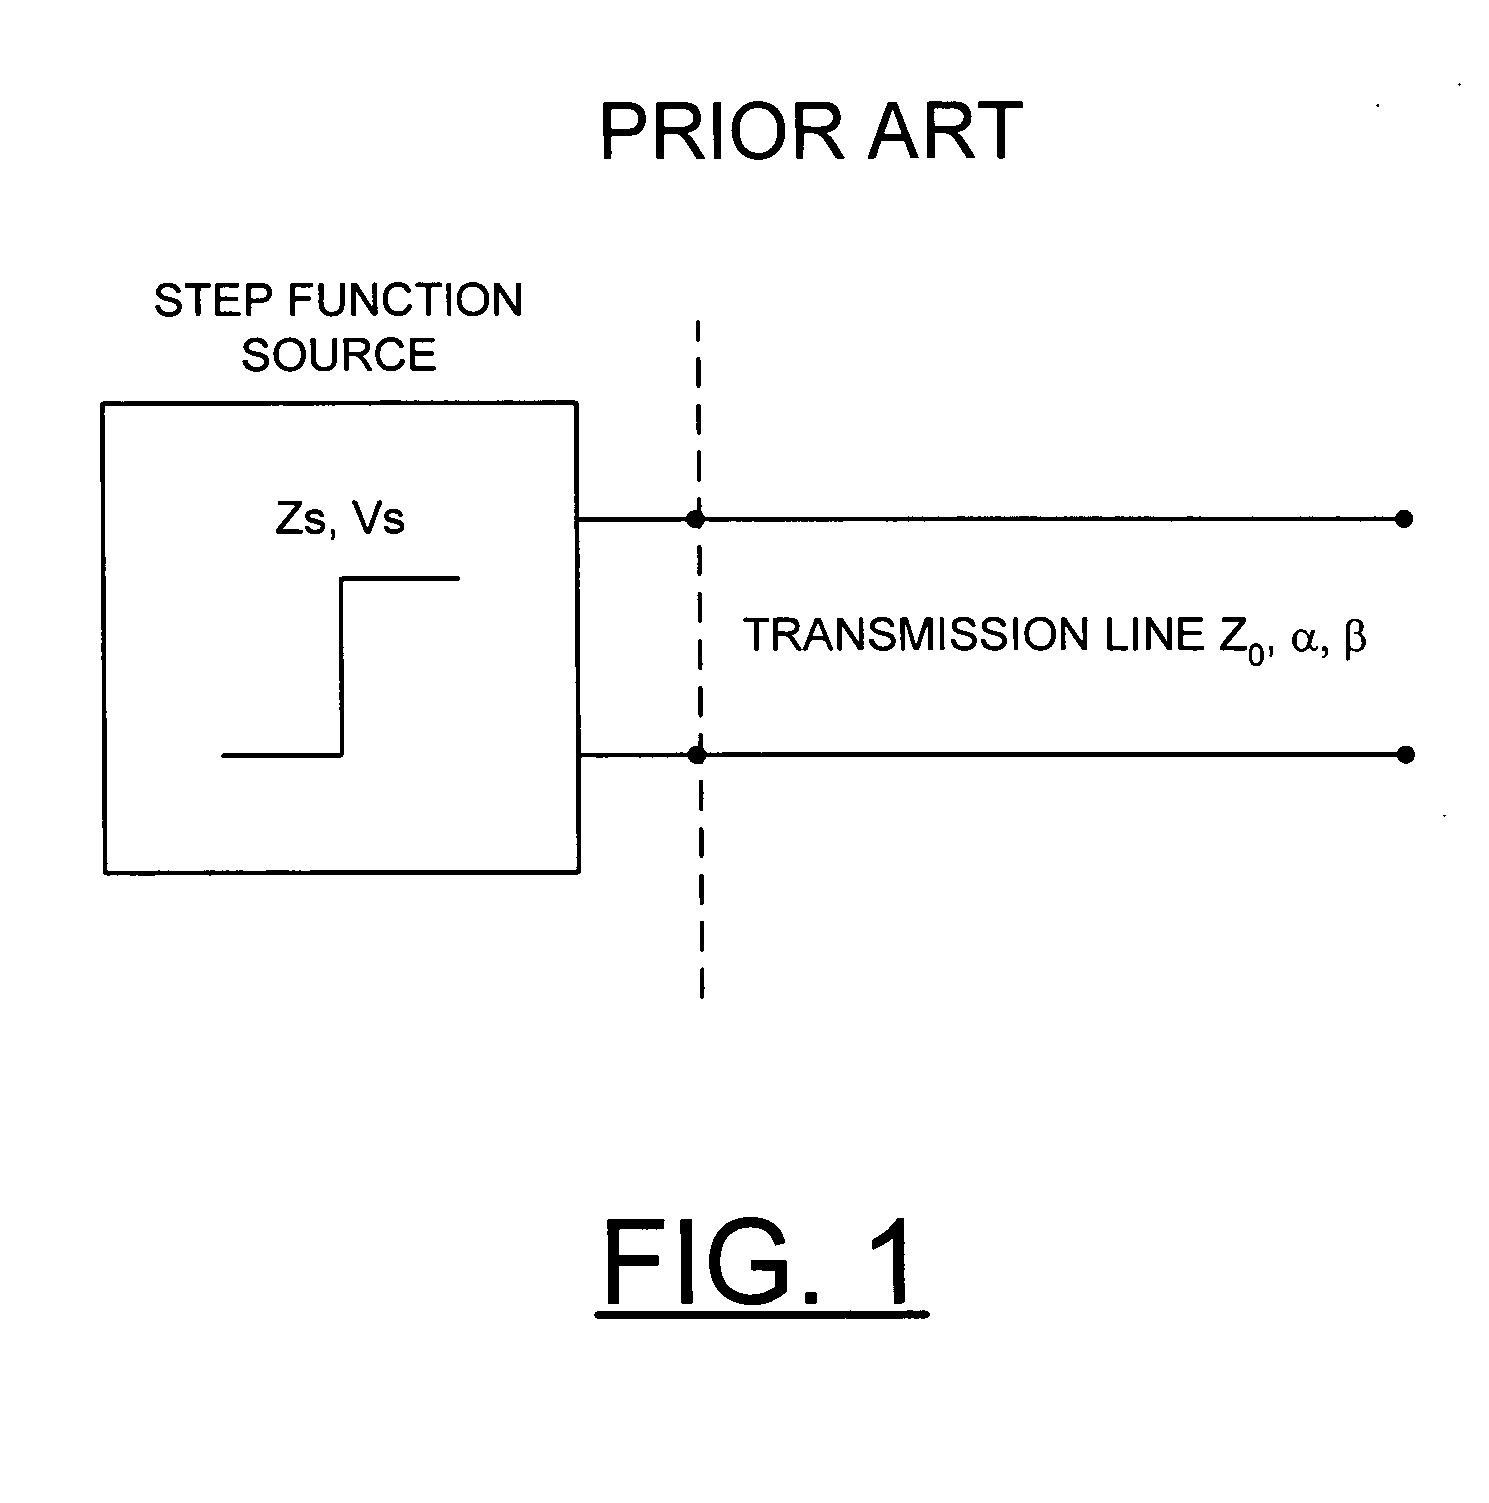 Method and apparatus for implementing automated electronic package transmission line characteristic impedance verification